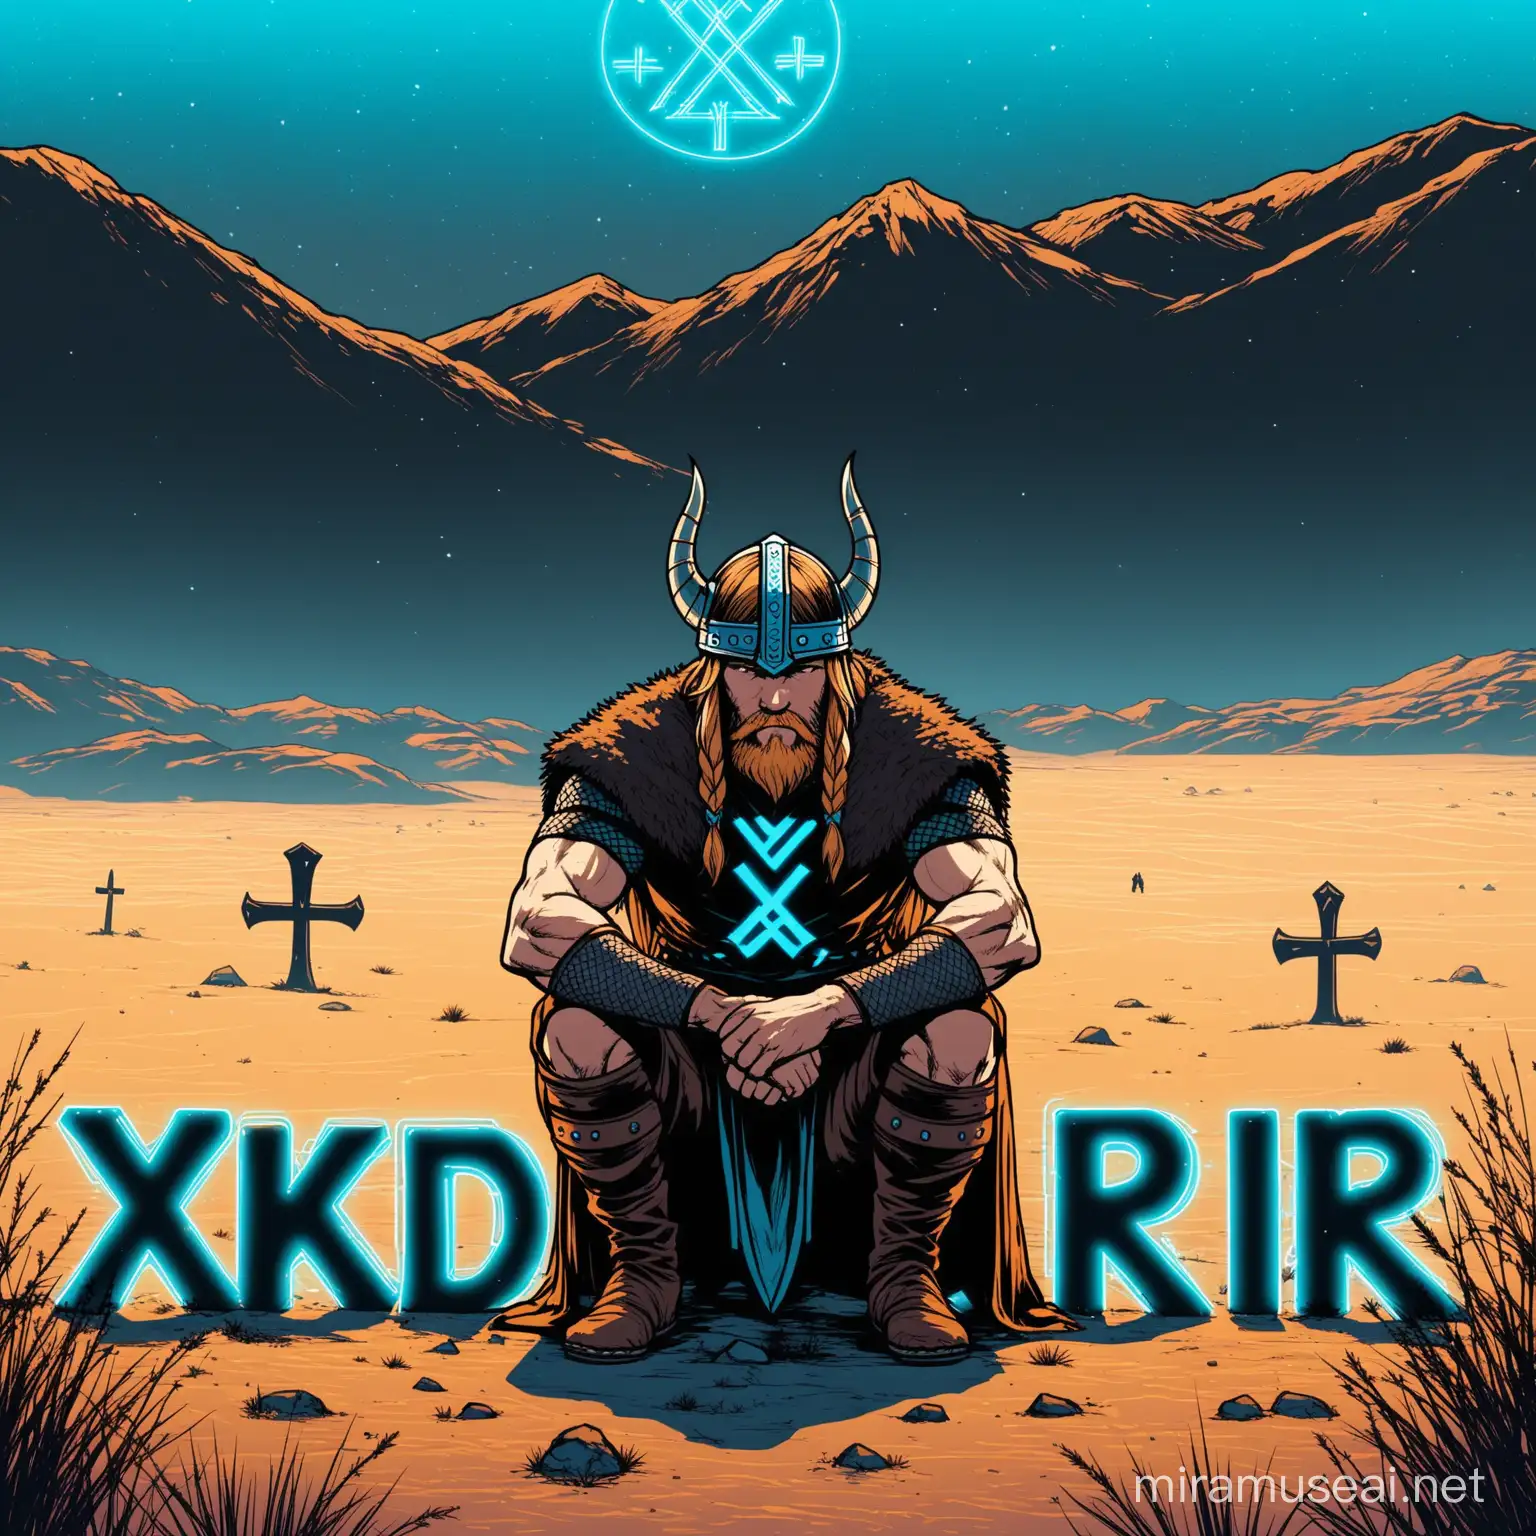 Cowboy Viking (group)
appreance-kid/crouched with arms on knees  /noir-brown/tan/full body/male/ / viking and cowboy runes neon blue/
background-desert/hills/mountain/rocks/ noir black/white/tumble-weeds